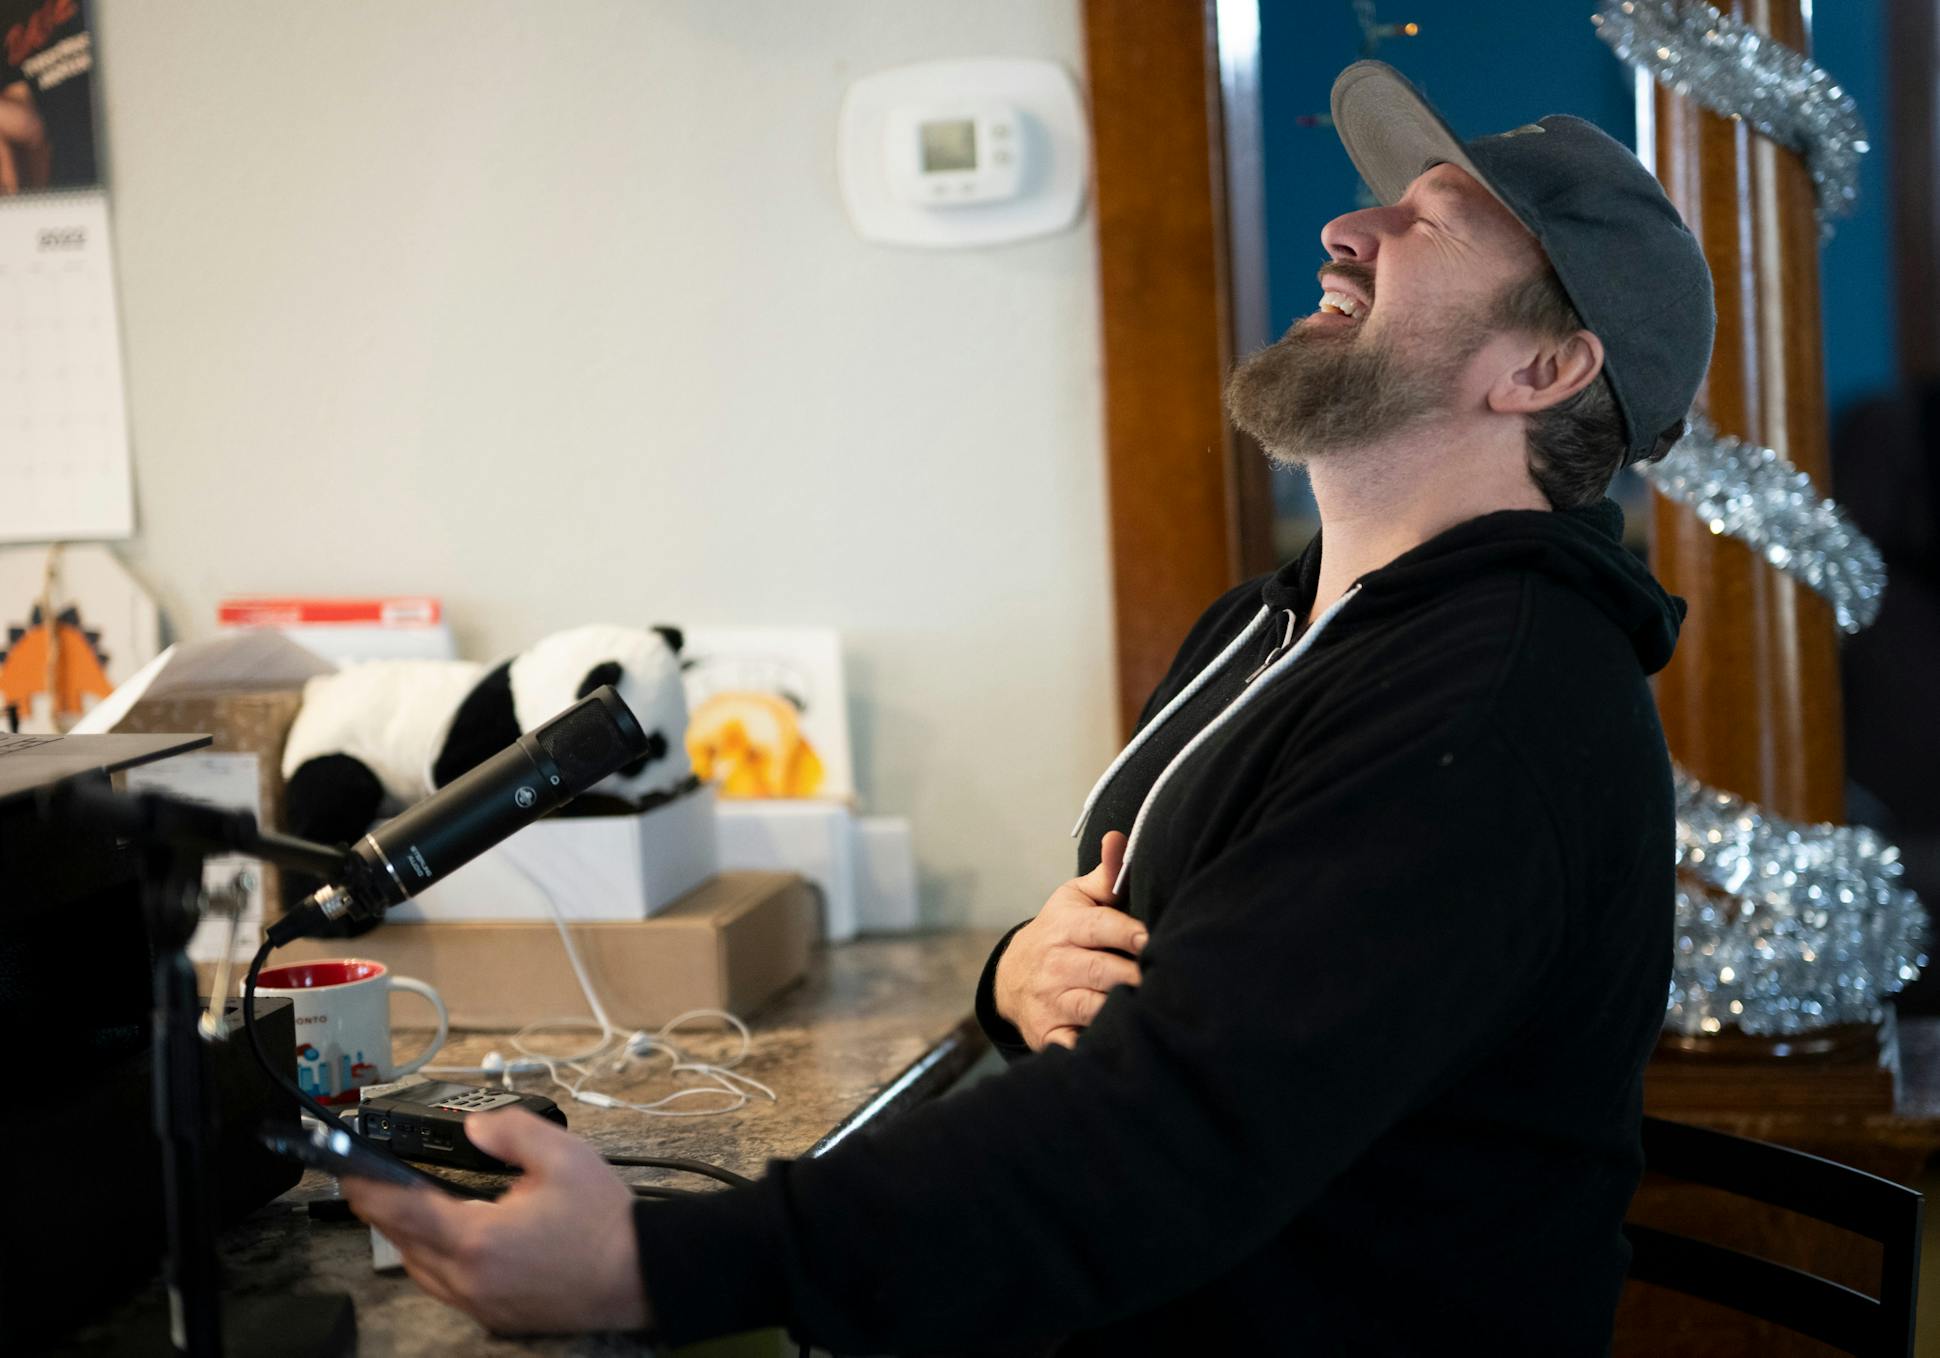 Chad Daniels belted out a laugh while speaking to co-host Cy Amundson after recording an episode of their podcast, “The Middle of Somewhere” in his home.